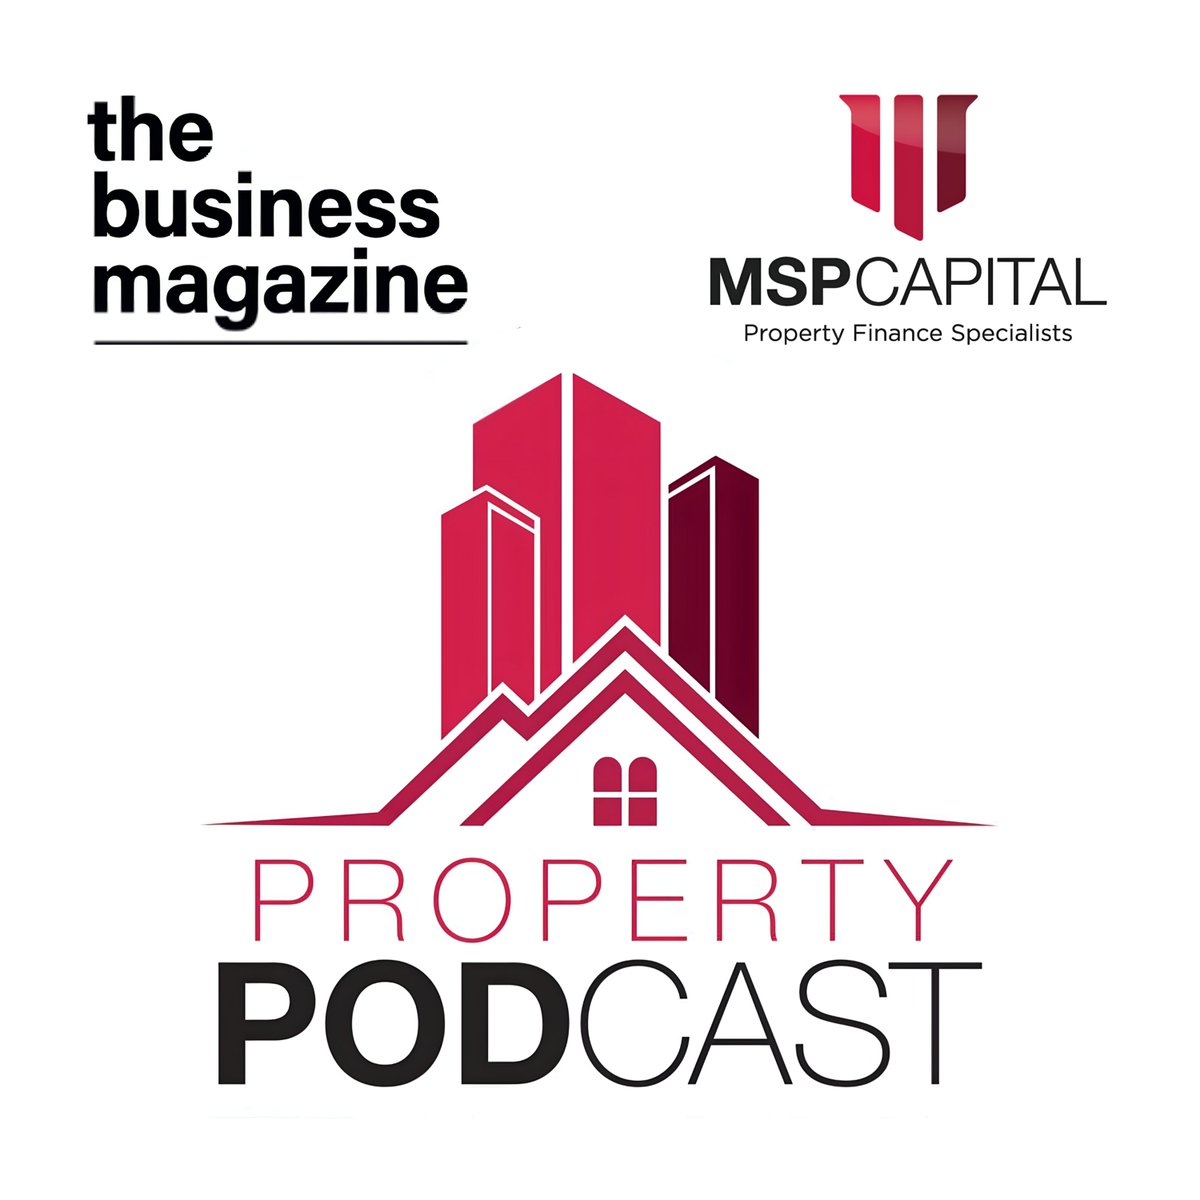 An enormous 'thank you' to everyone involved with The Business Magazine Property Podcast! 🙌🔊

@MSP_Capital @VailWilliams @SightlineVideo #podcast #property #ukproperty #propertypodcast #ukbusiness #businessnews #businessintelligence
thebusinessmagazine.co.uk/podcasts/